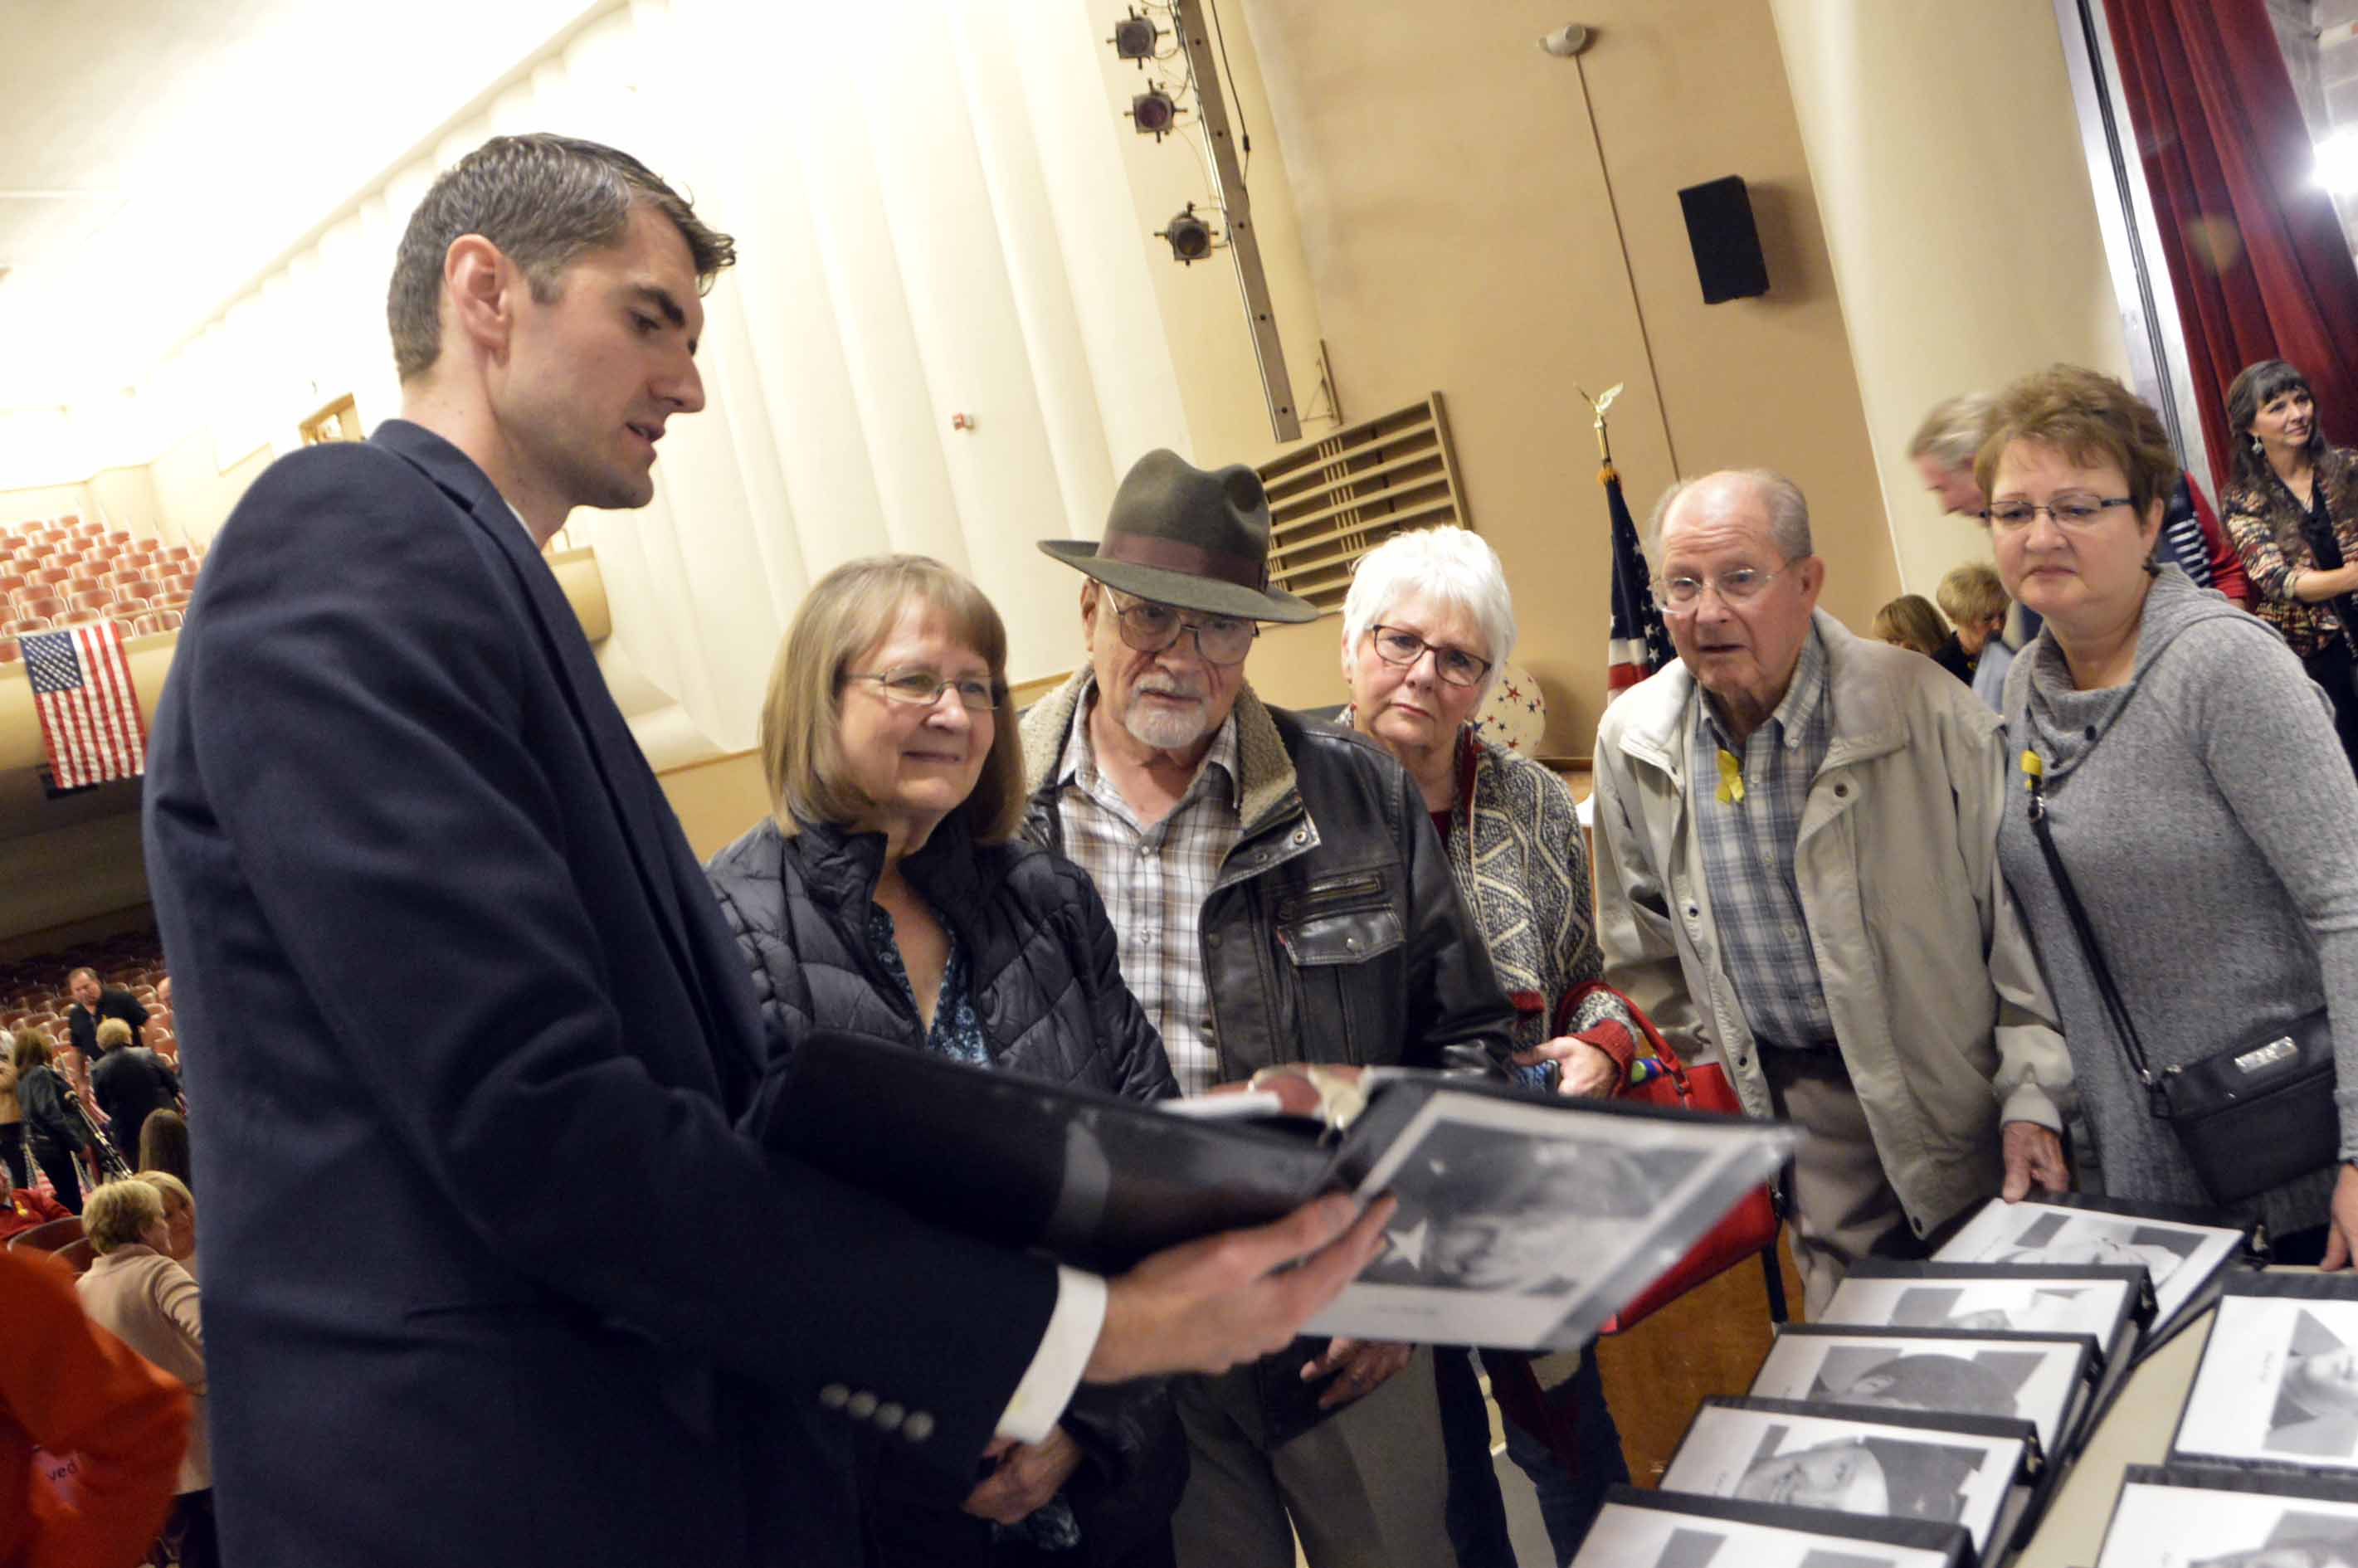 Rediscovered plaque helps Granite Park honor alumni who died in World War II